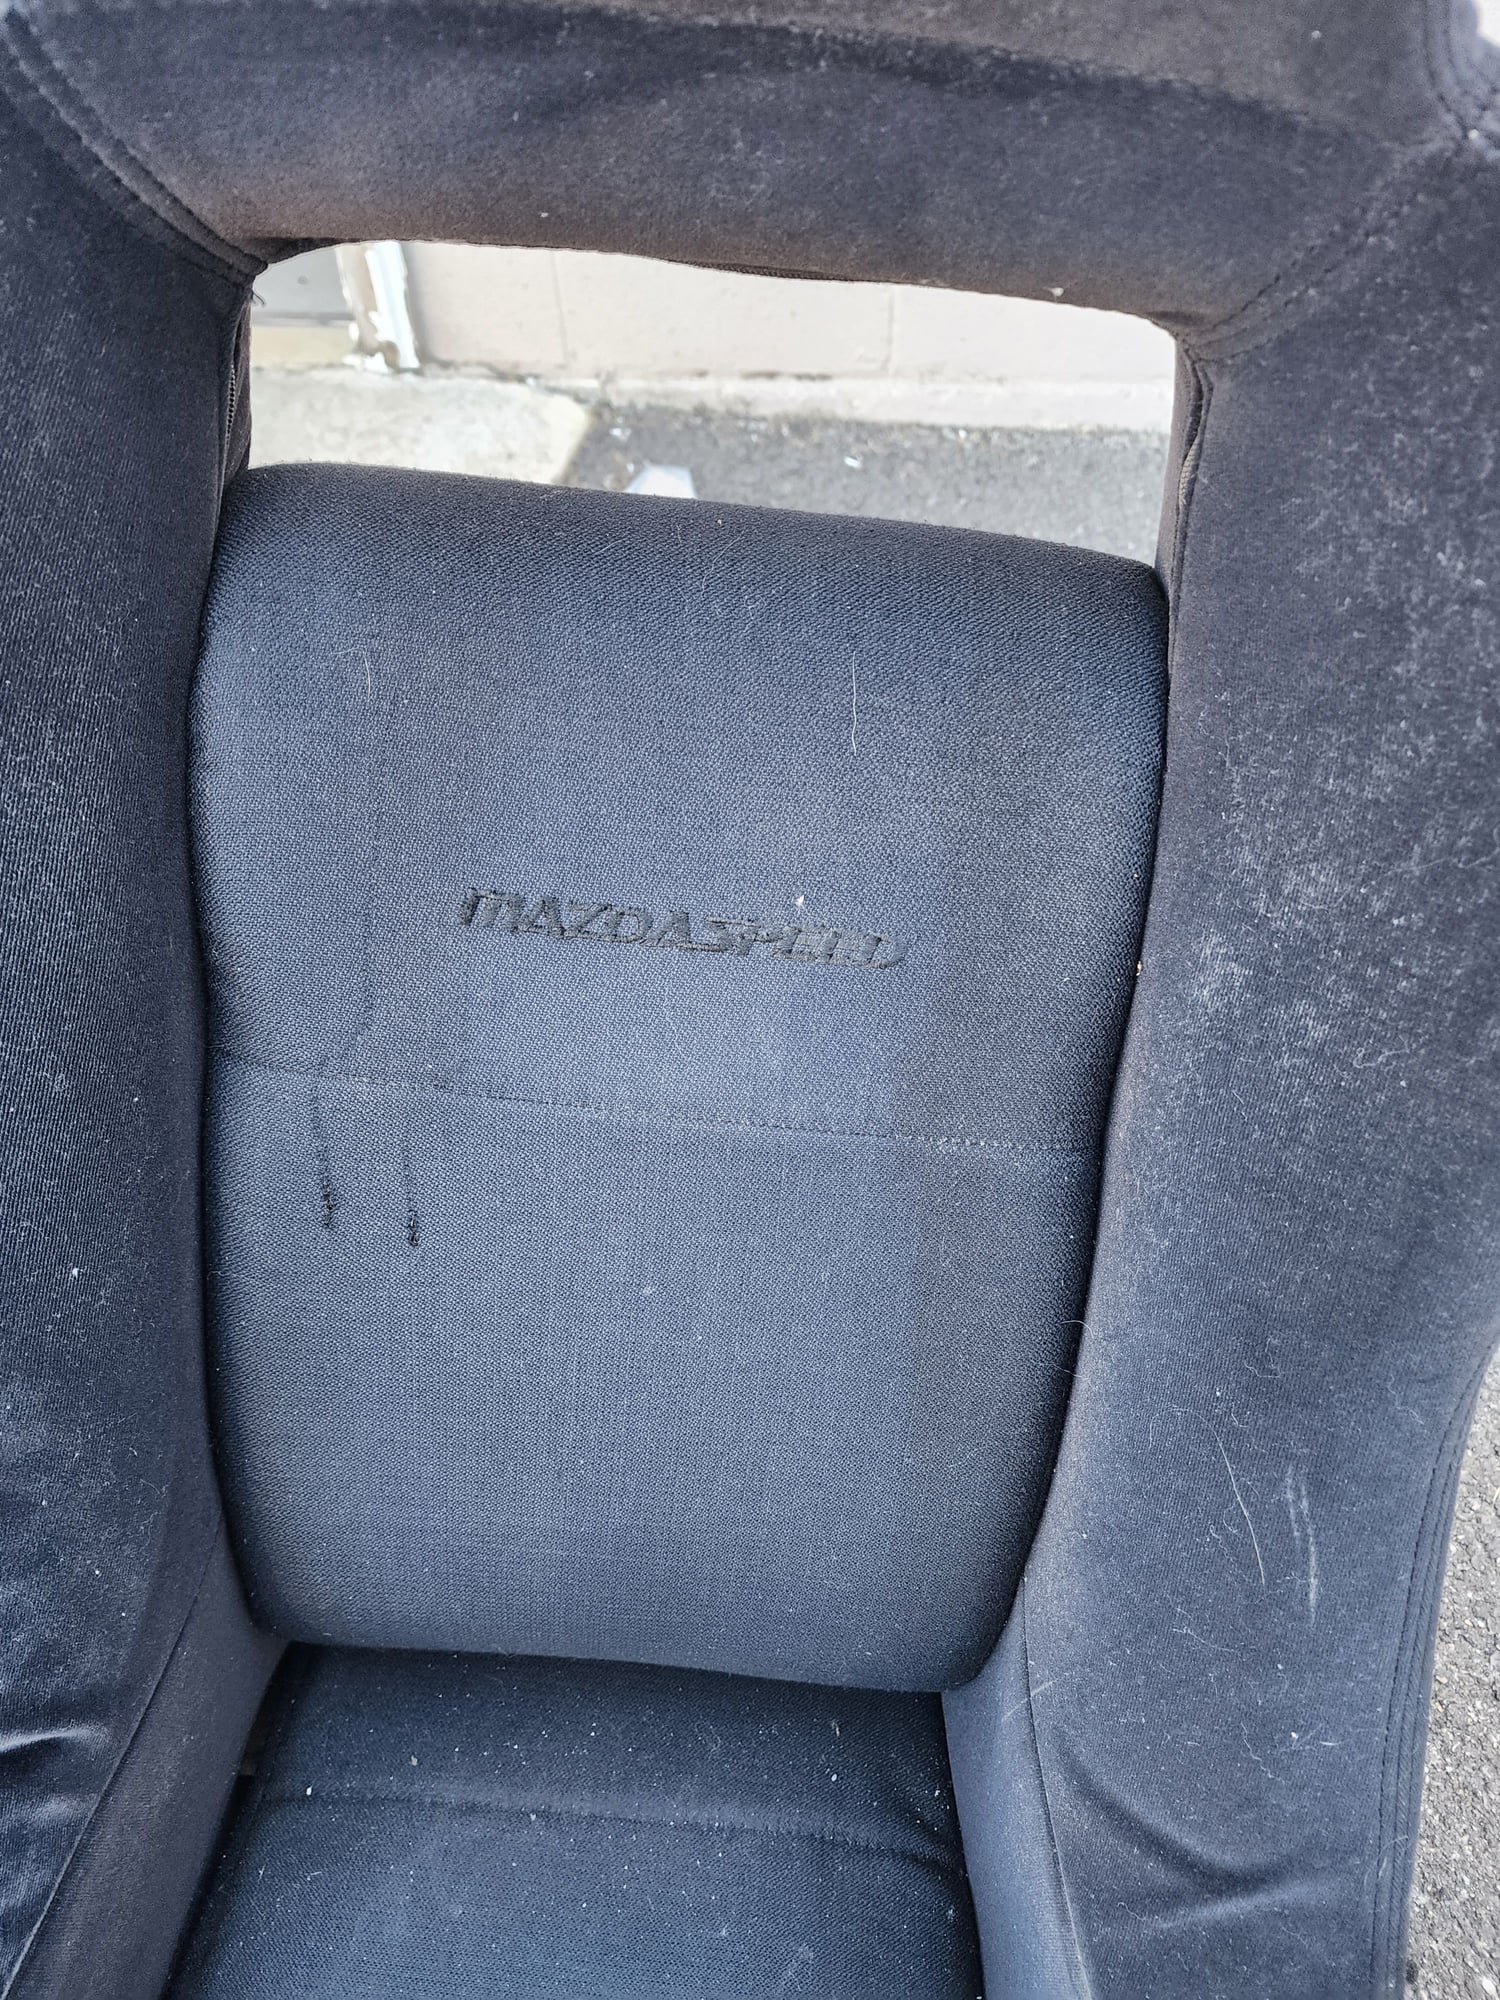 Interior/Upholstery - 1 infini seat and 1 infini Mazdaspeed seat and more infini parts - Used - 1986 to 1991 Mazda RX-7 - Brigham City, UT 84302, United States